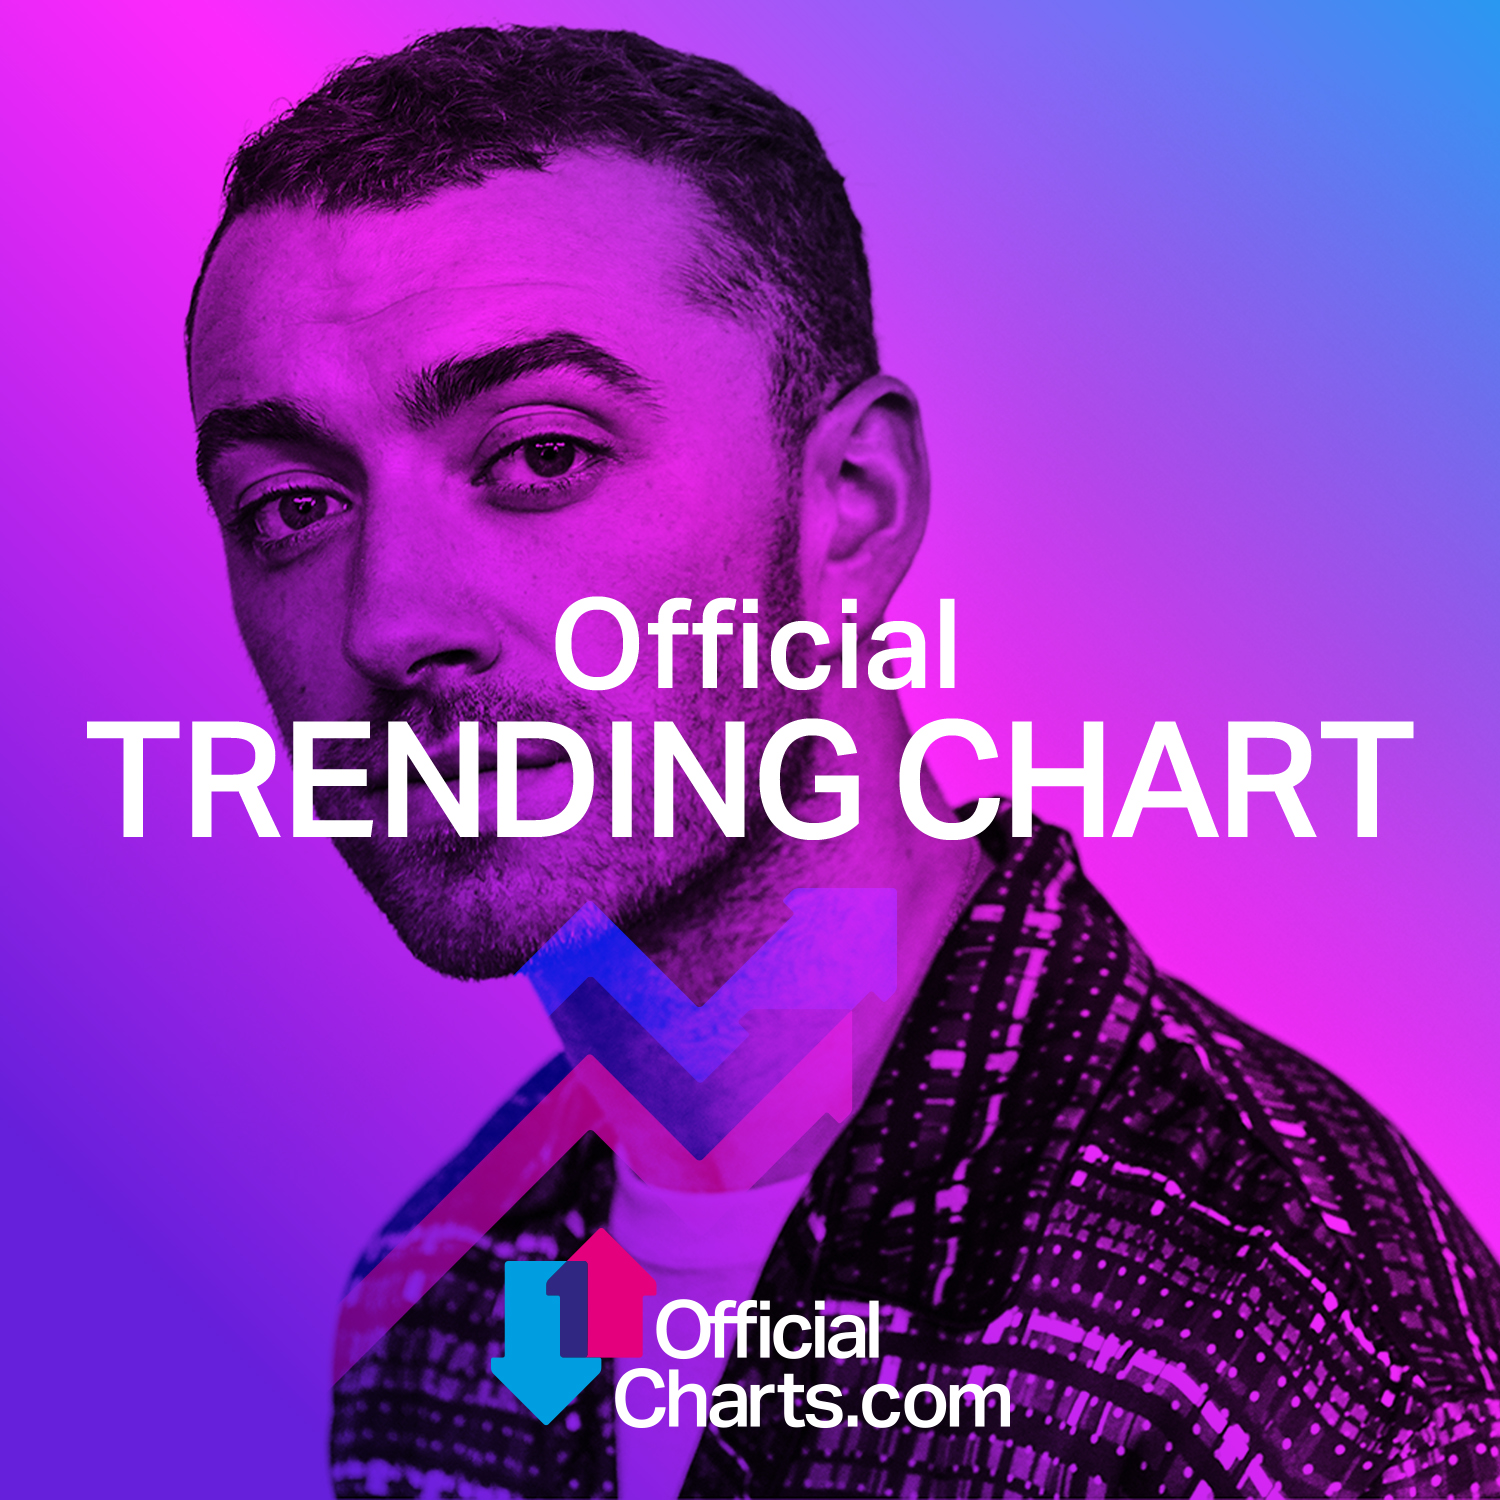 Sam Smith tops the Official Trending Chart